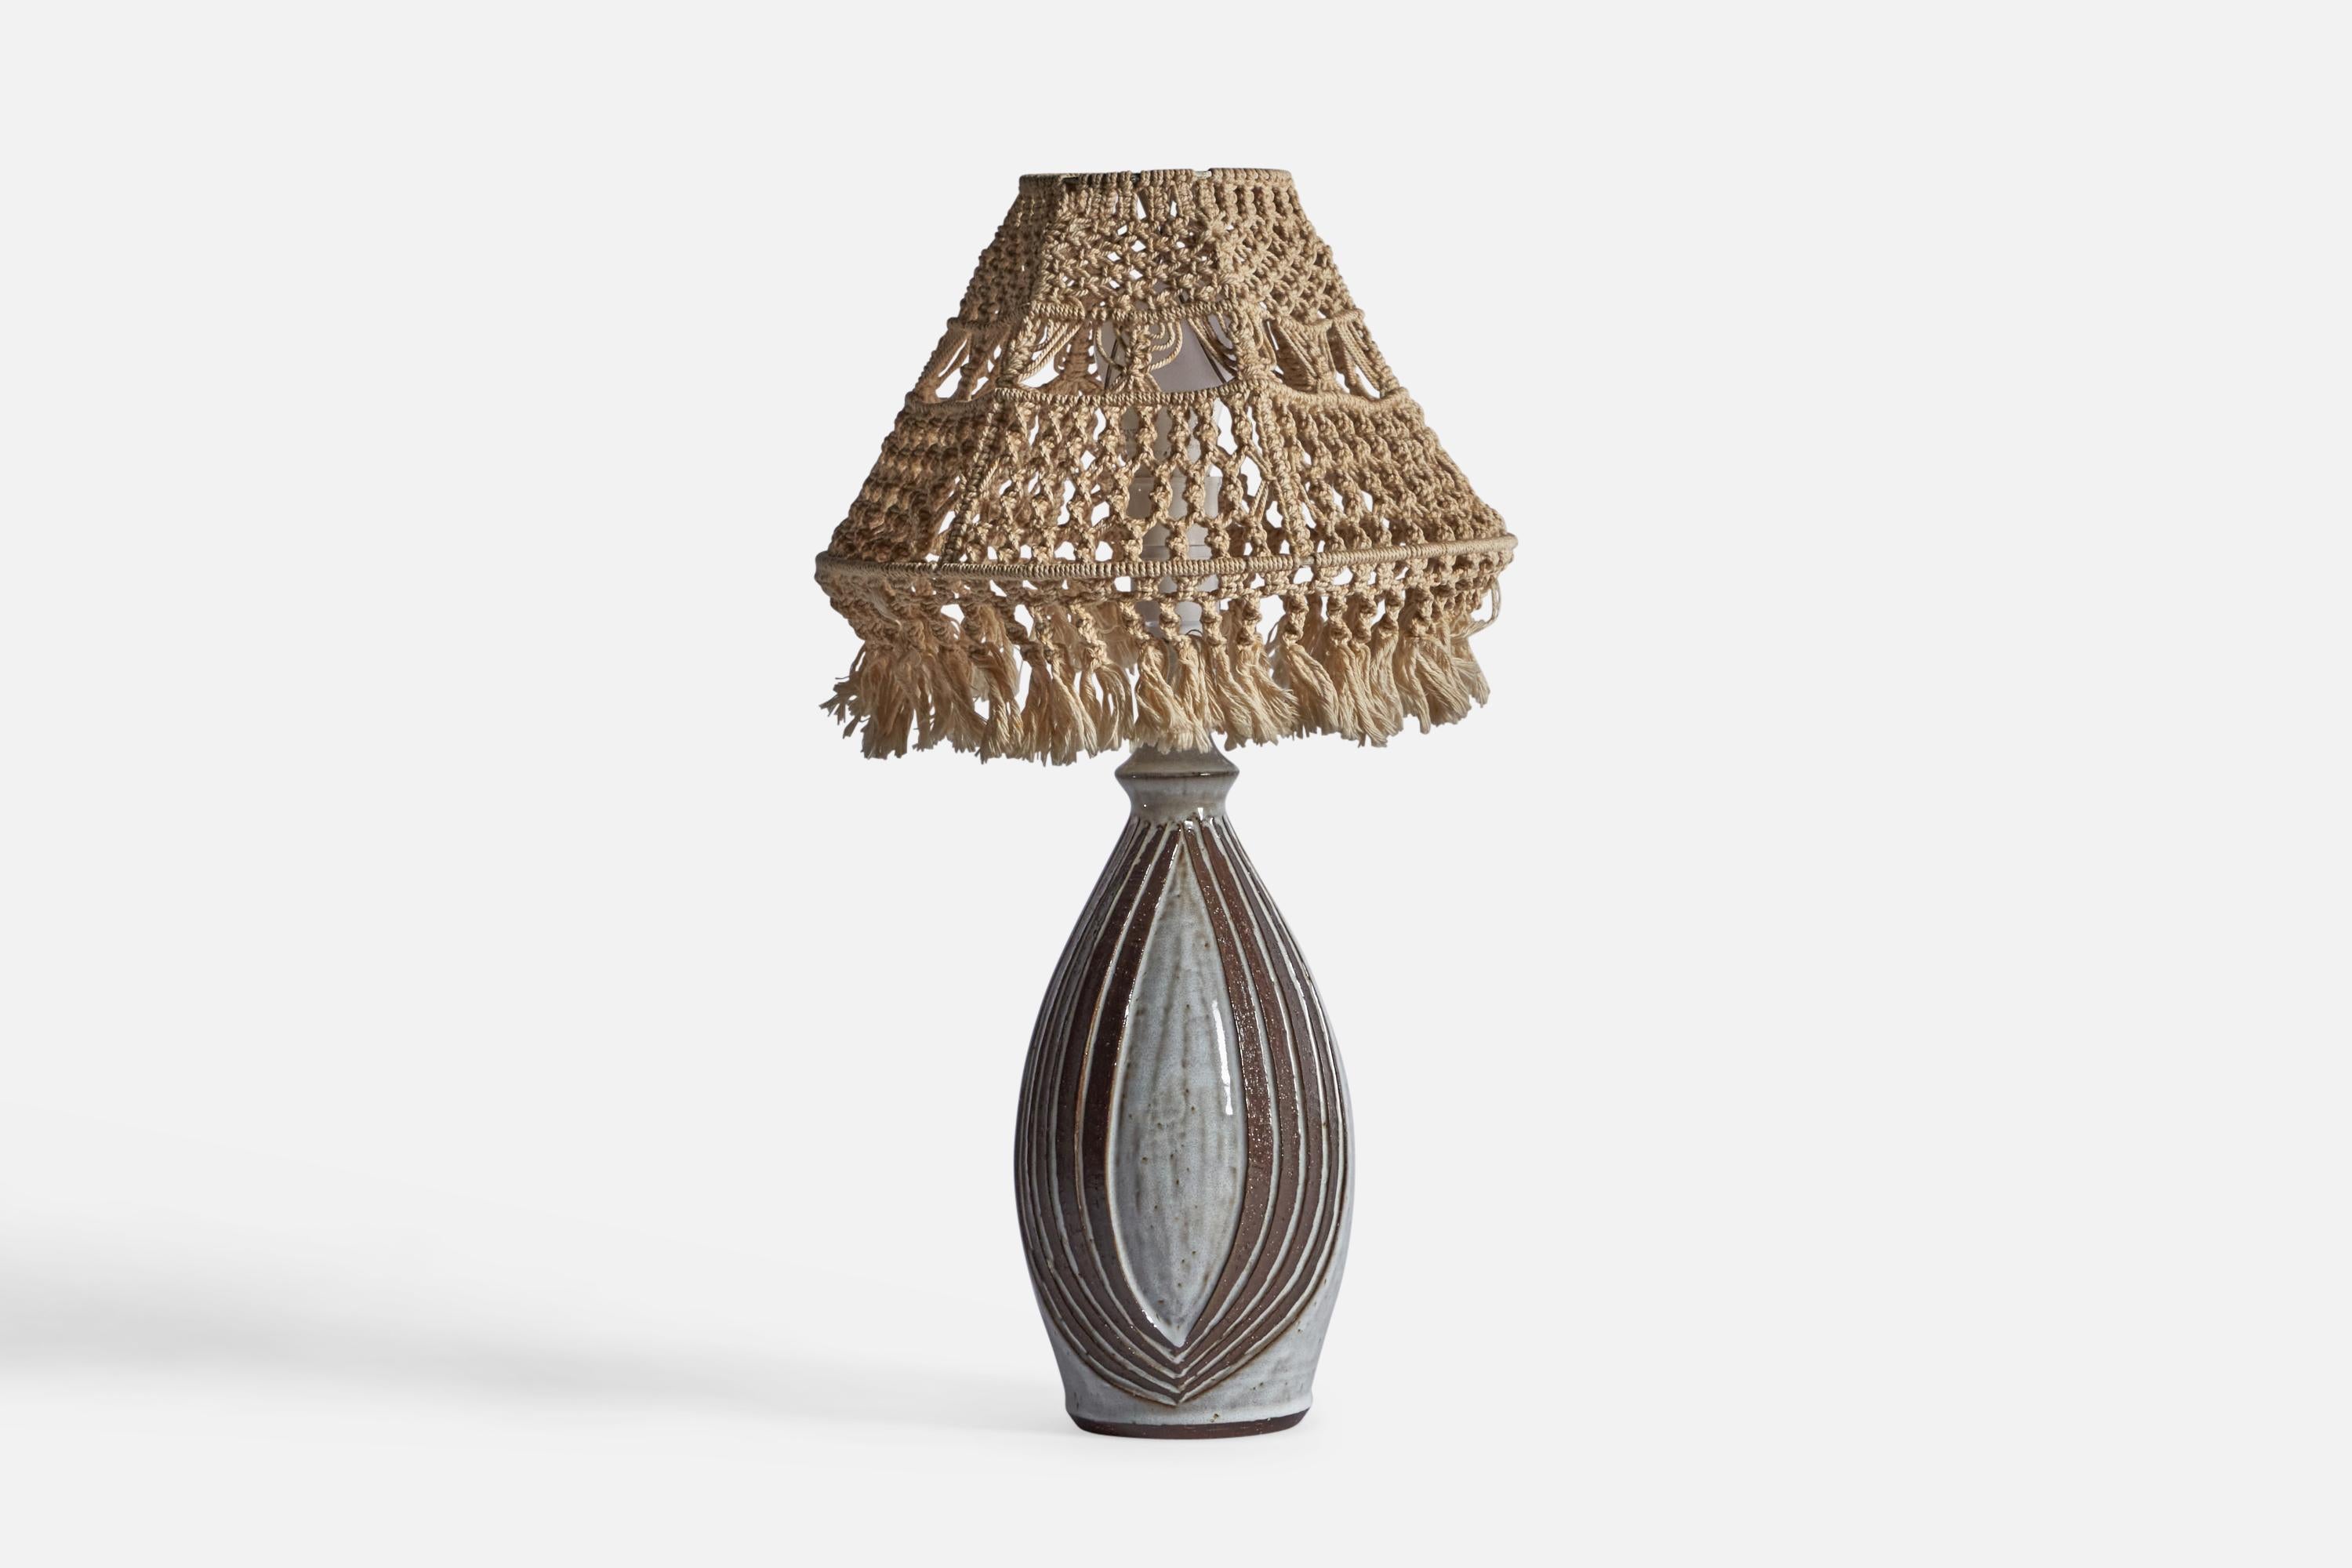 A grey-glazed and woven fabric table lamp, designed by Marianne Starck and produced by Michael Andersen, Bornholm, Denmark, 1960s.

Sold with Lampshade.

Dimensions stated are of Table Lamp with Lampshade attached.